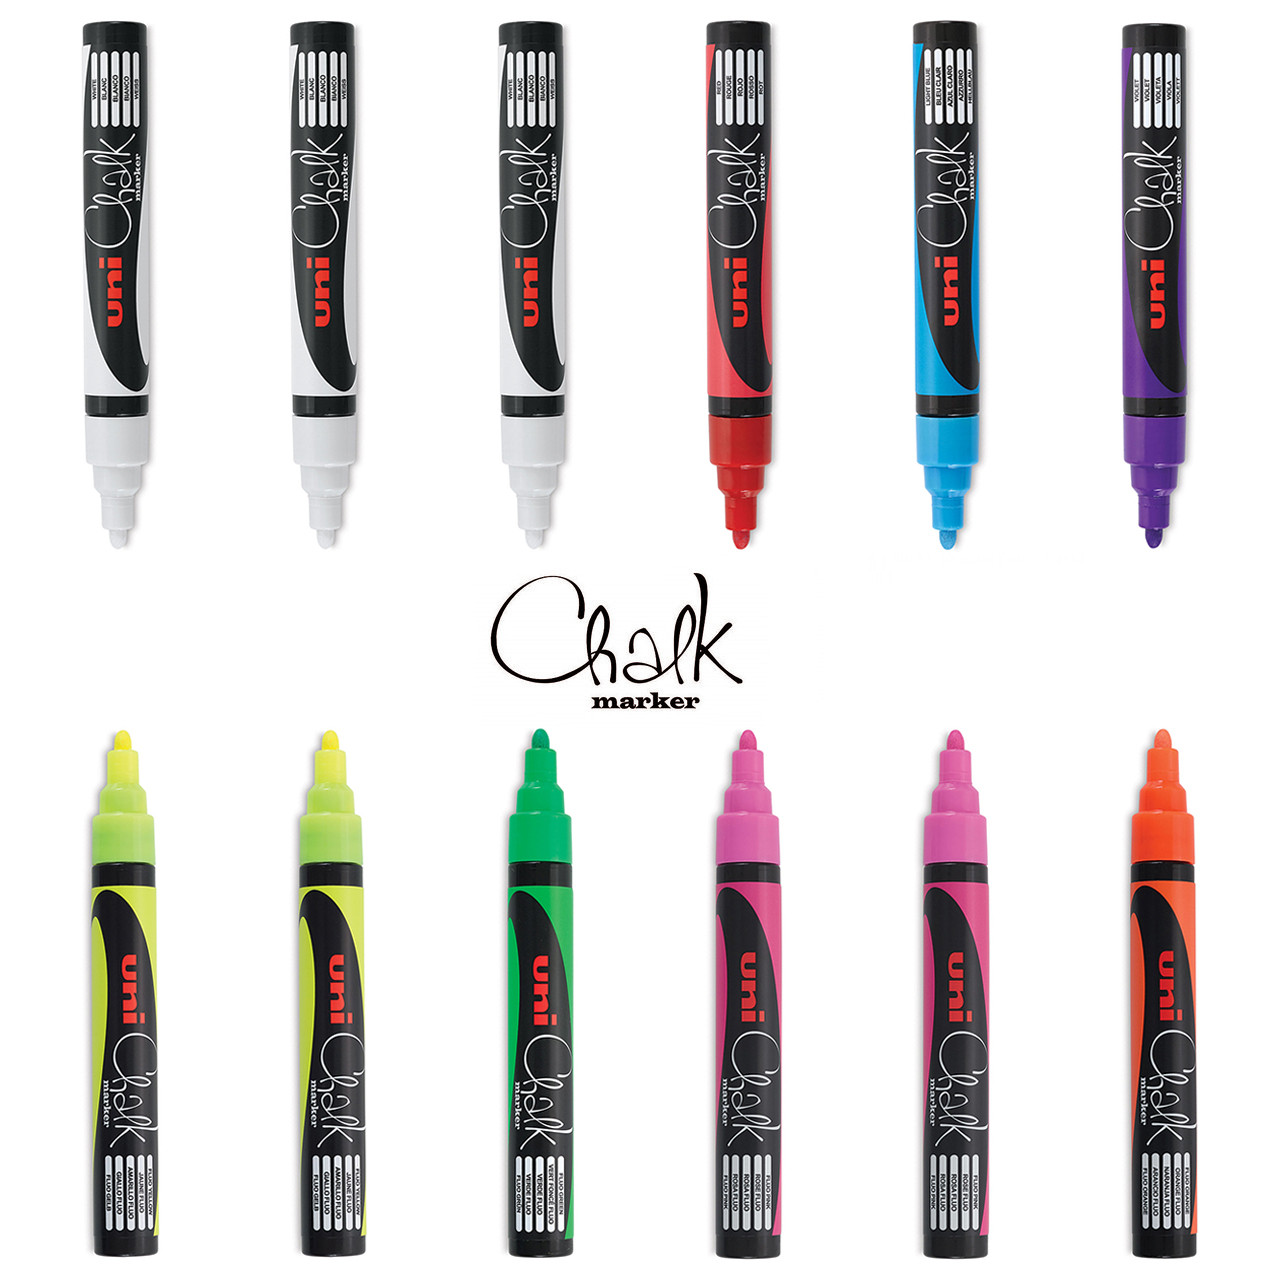 Uni Liquid Chalk Marker (PWE5M12A) Bullet Tip 2.5mm Assorted in a Pack of  12